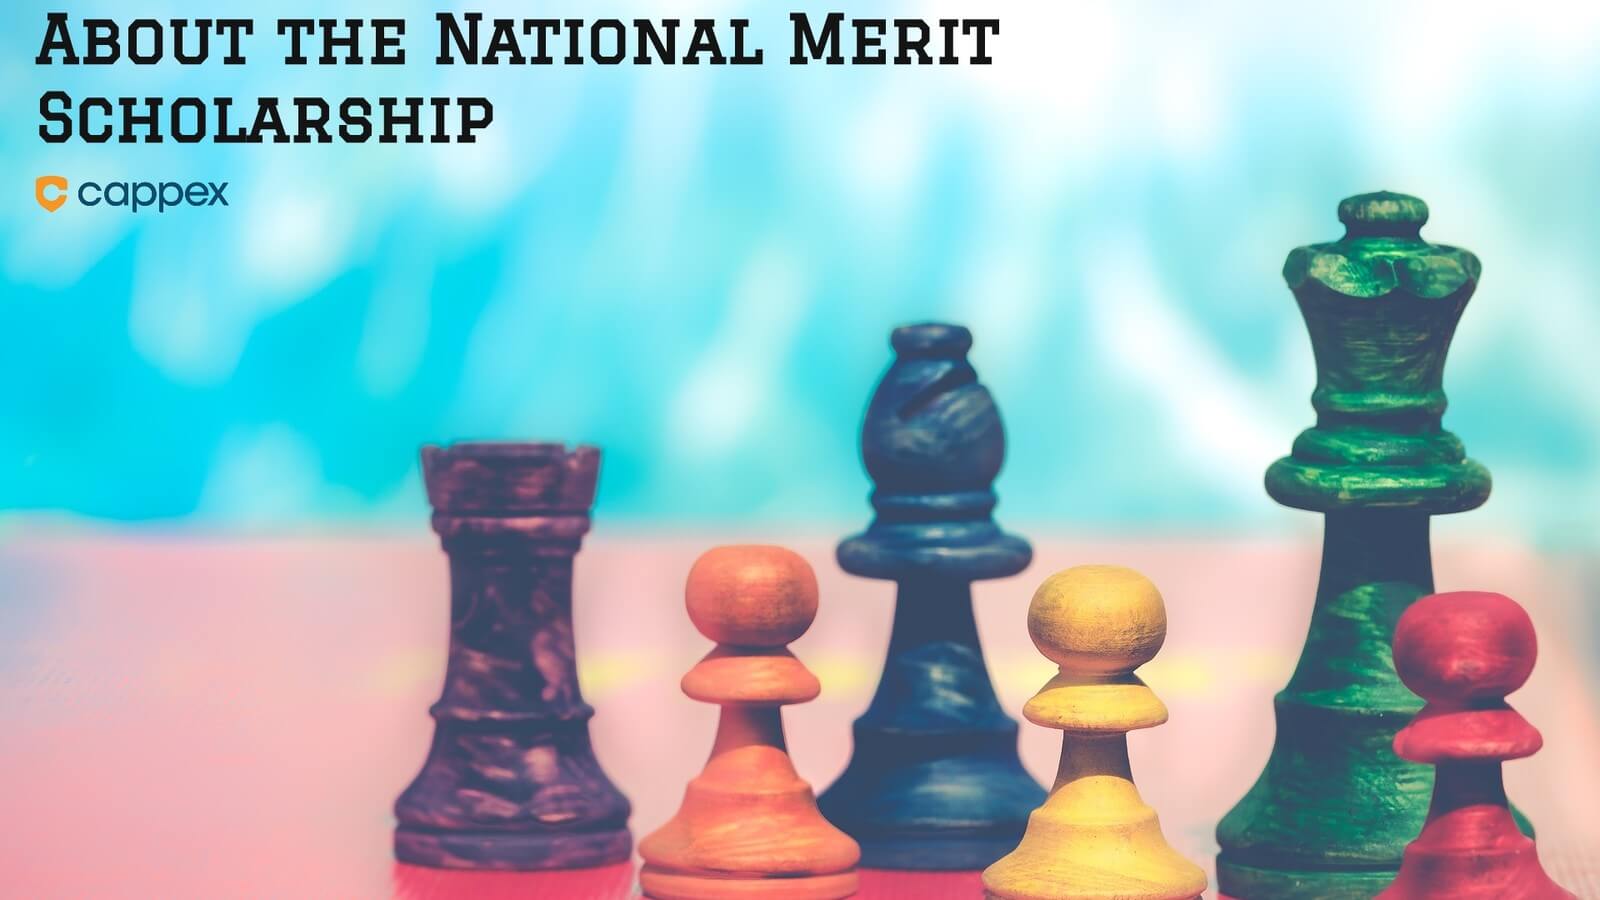 Everything You Need to Know About the National Merit Scholarship